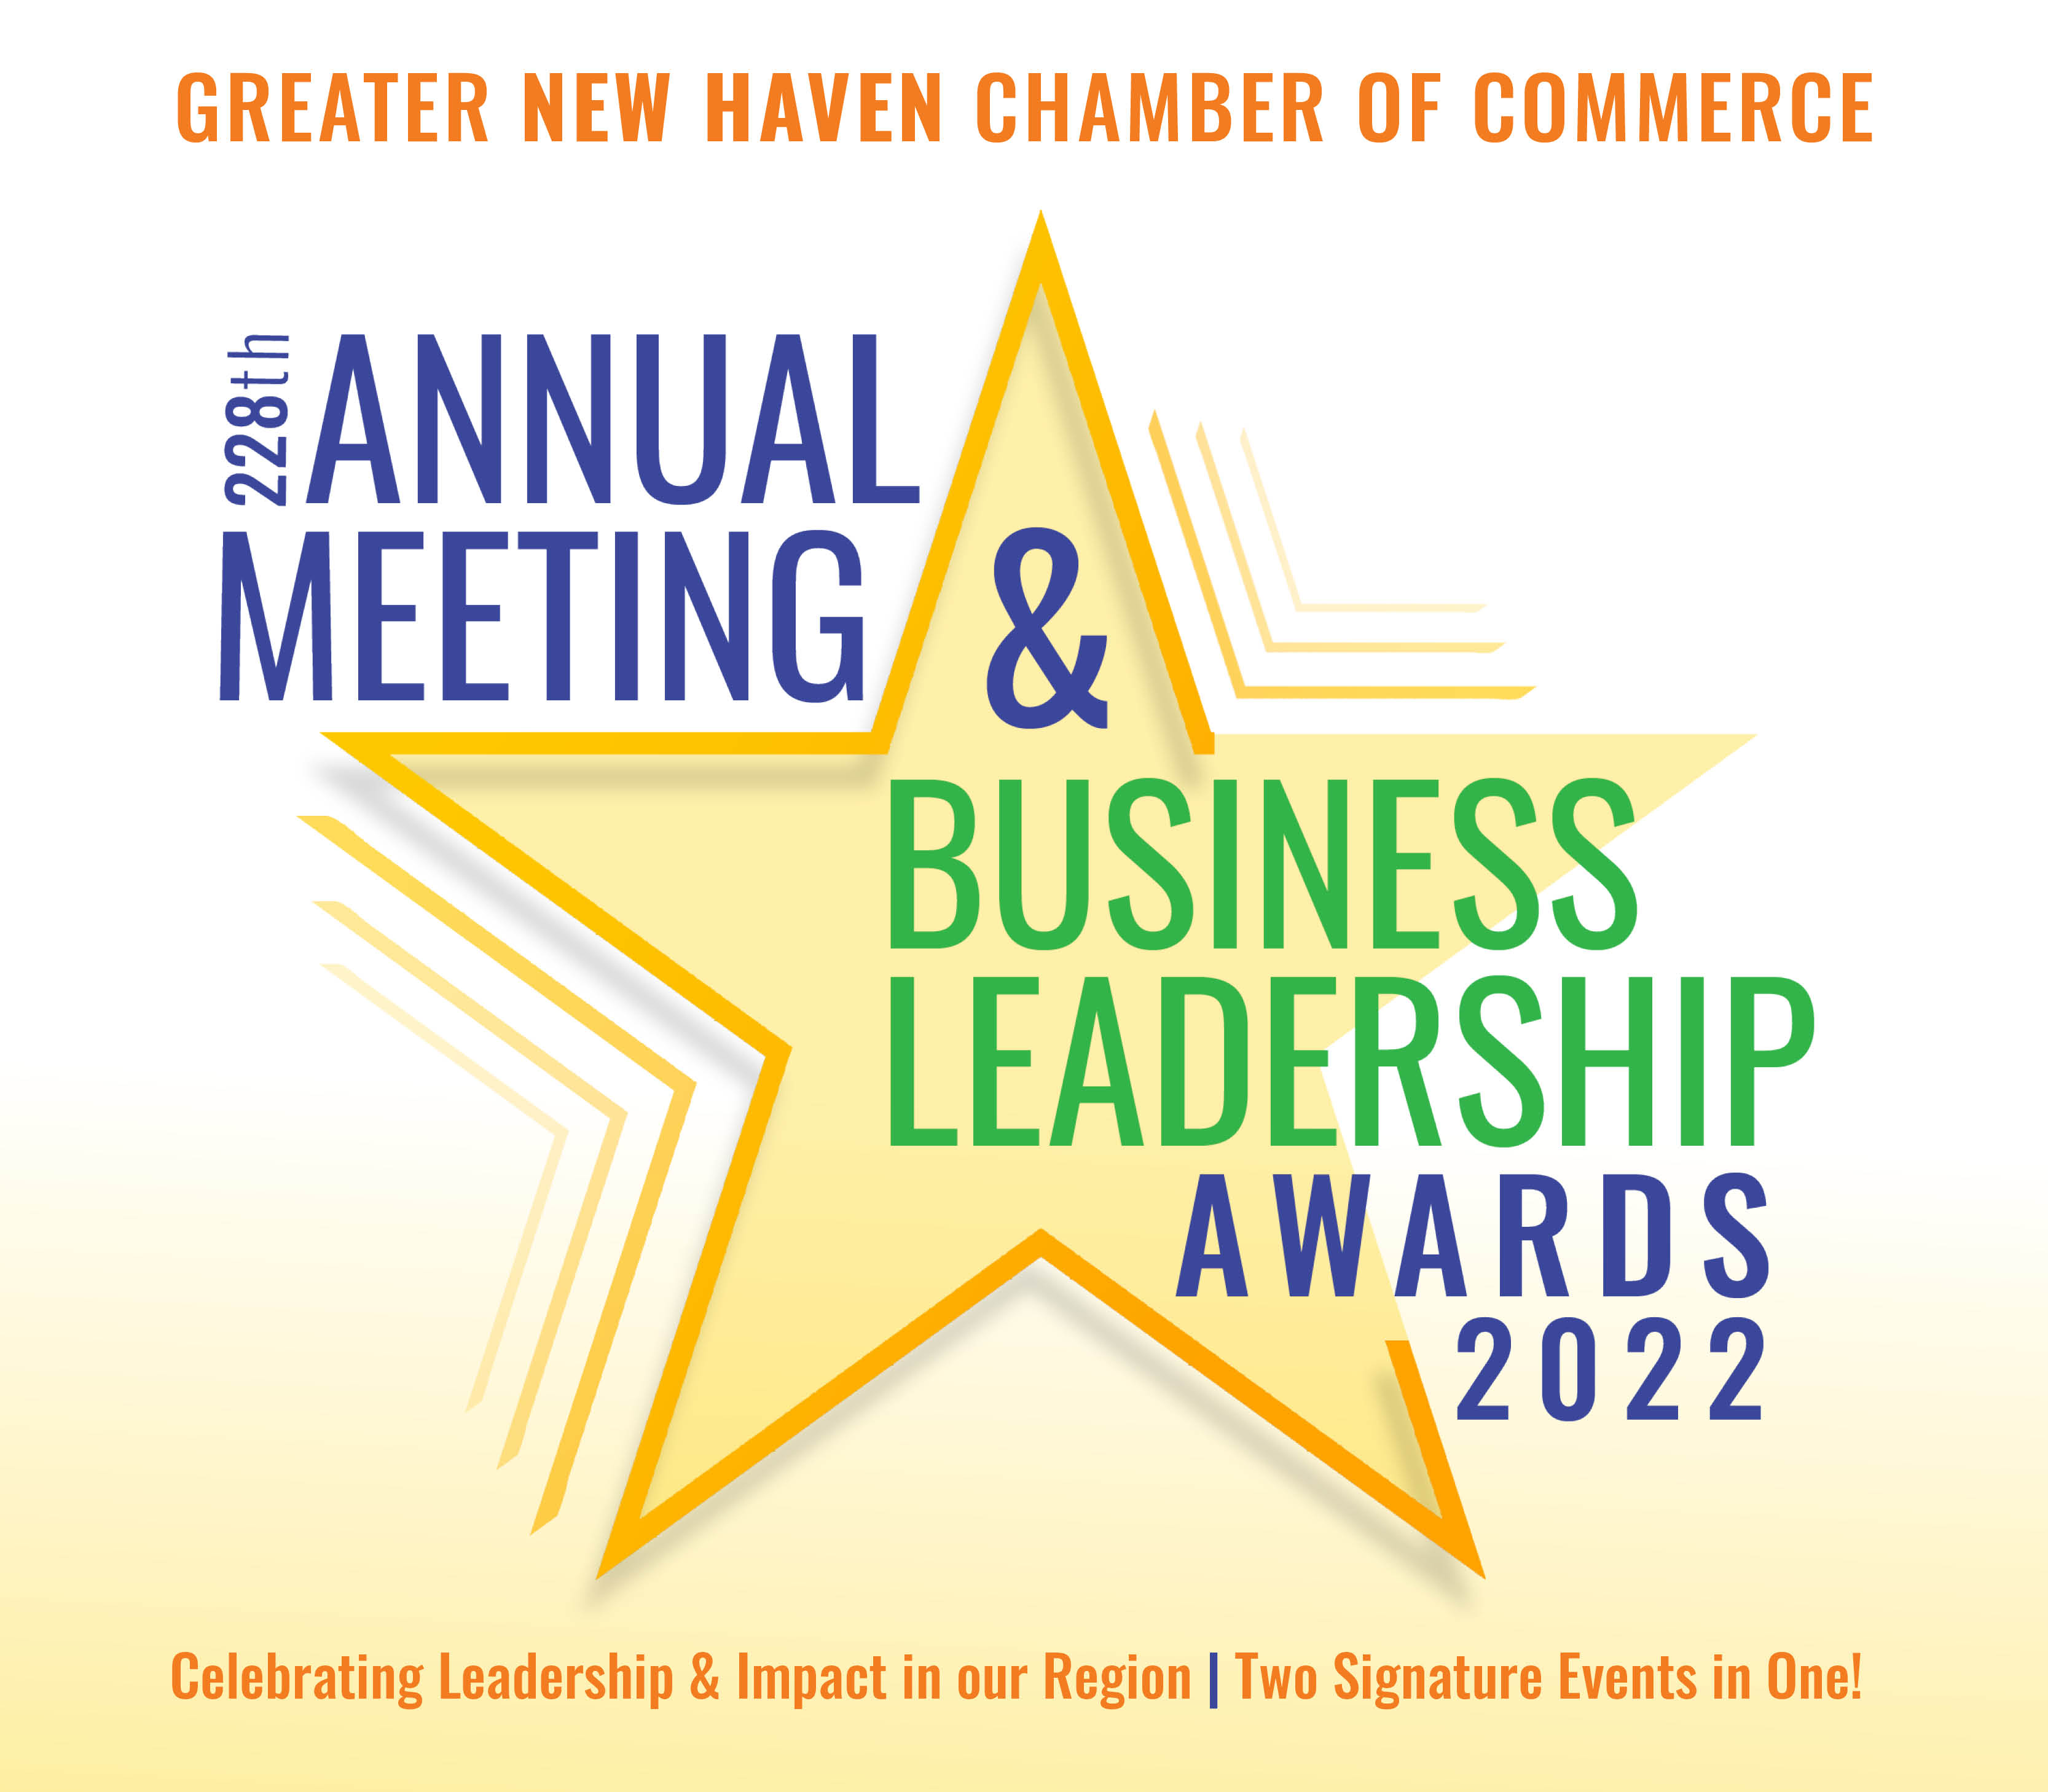 Image for Greater New Haven Chamber to Honor The Narrative Project with the 2022 Sharon Clemons Equity & Inclusive Opportunity Award at 228th Annual Meeting & Business Leadership Awards